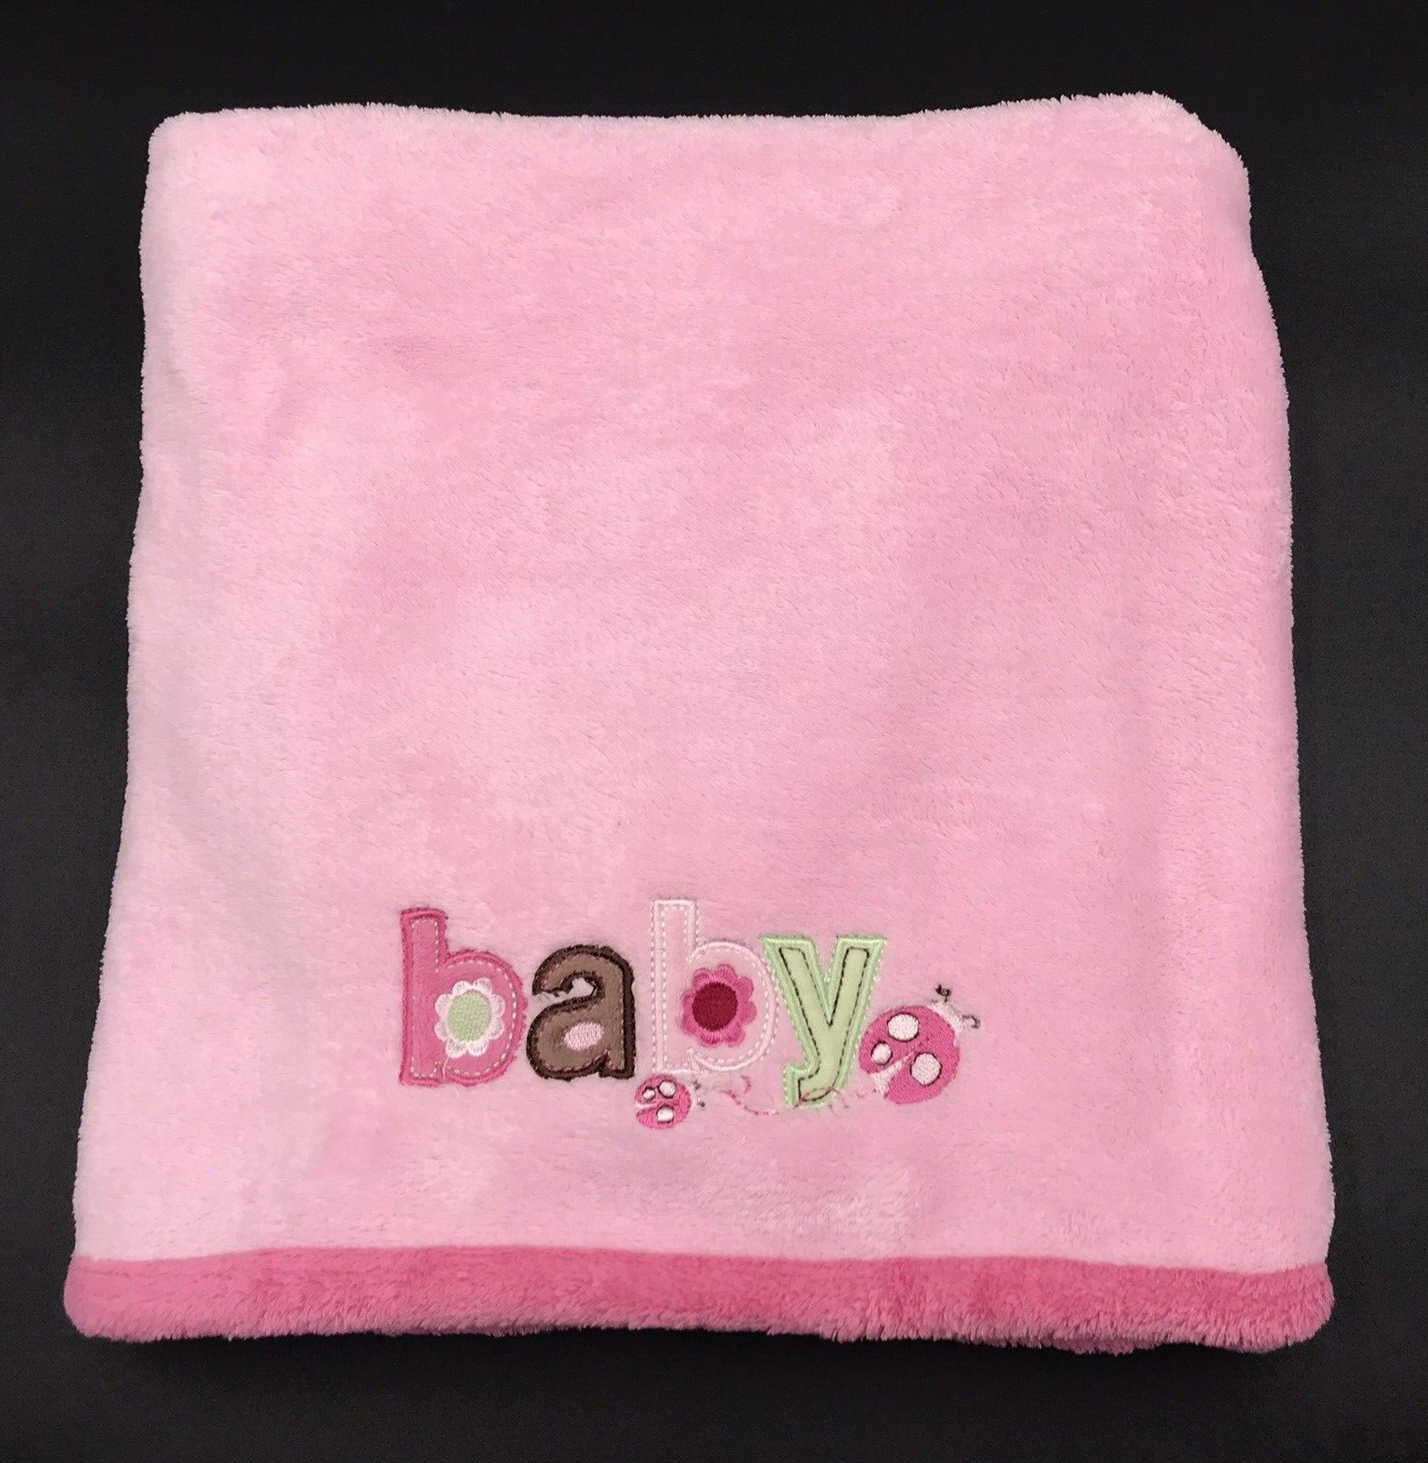 Primary image for Carter's Baby Blanket Ladybug Embroidered Single Layer